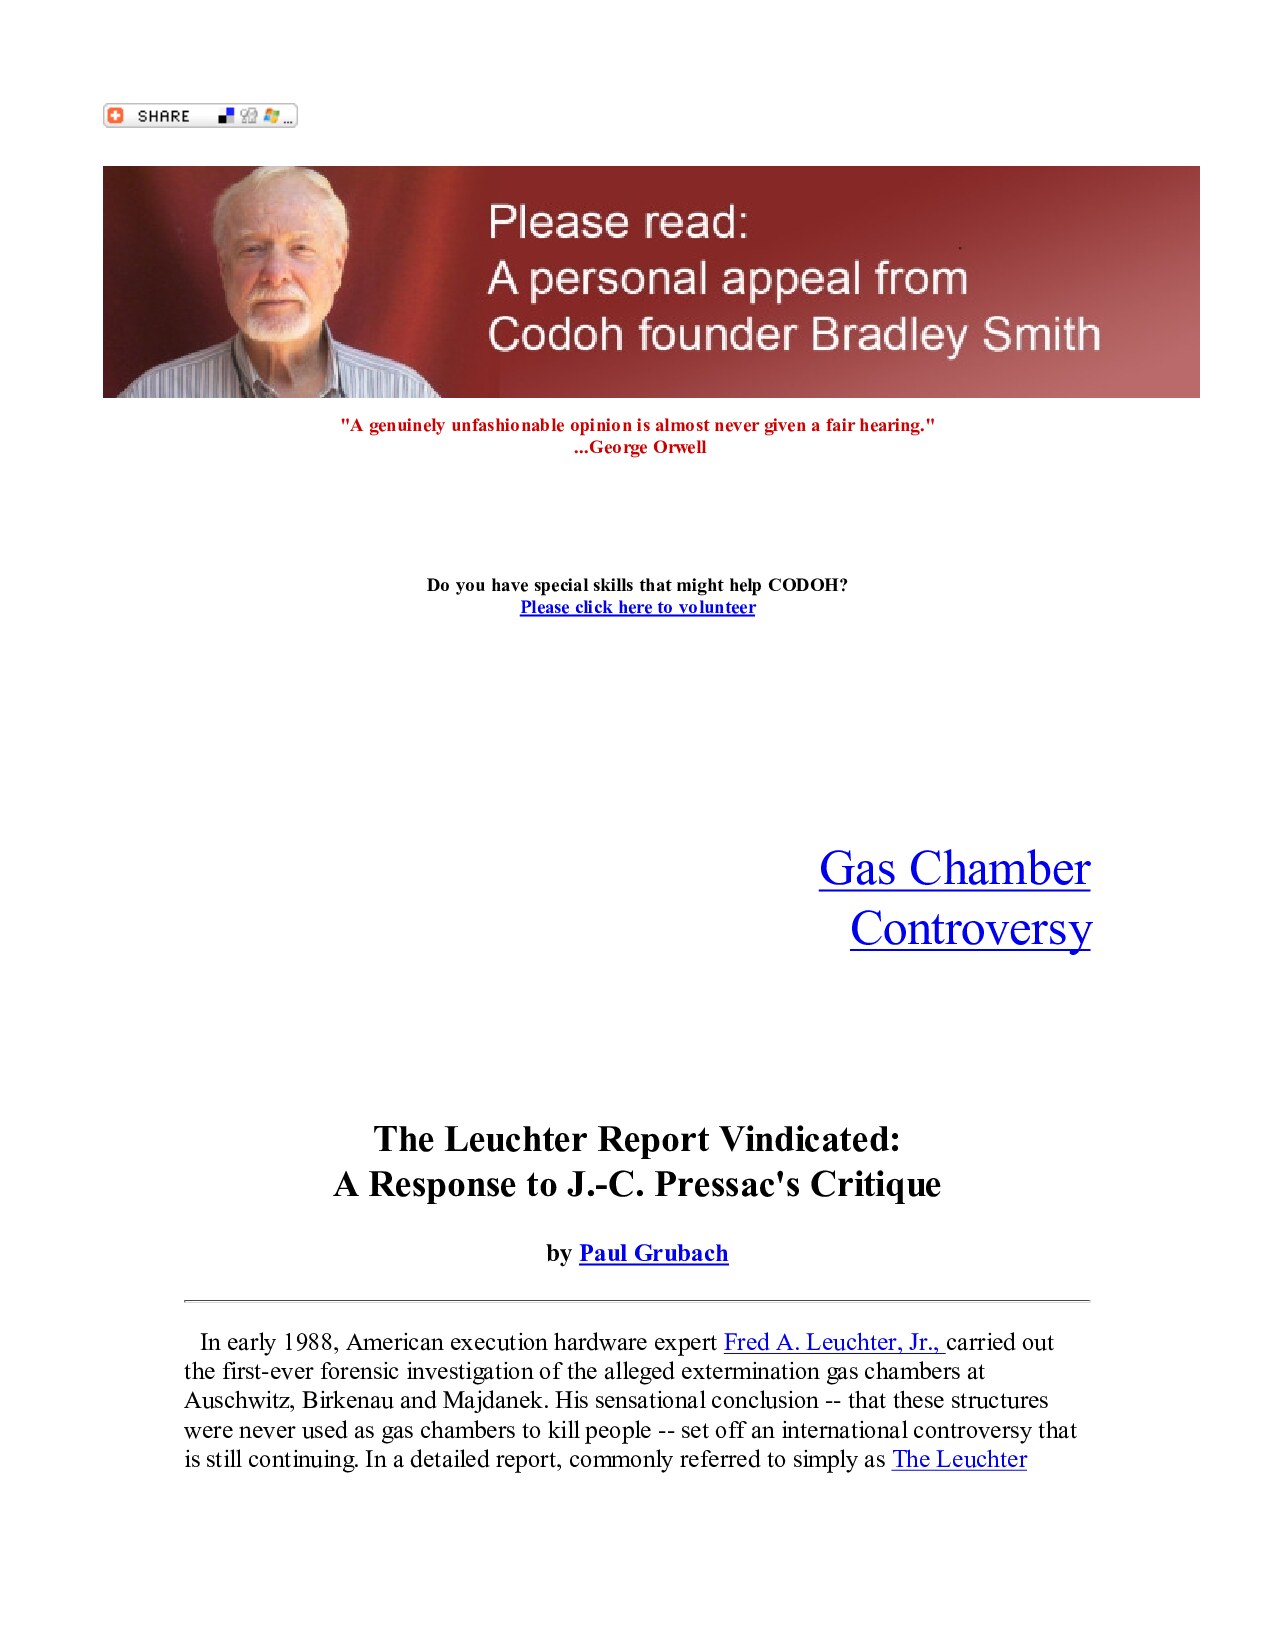 Gas Chambers: The Leuchter Report Vindicated